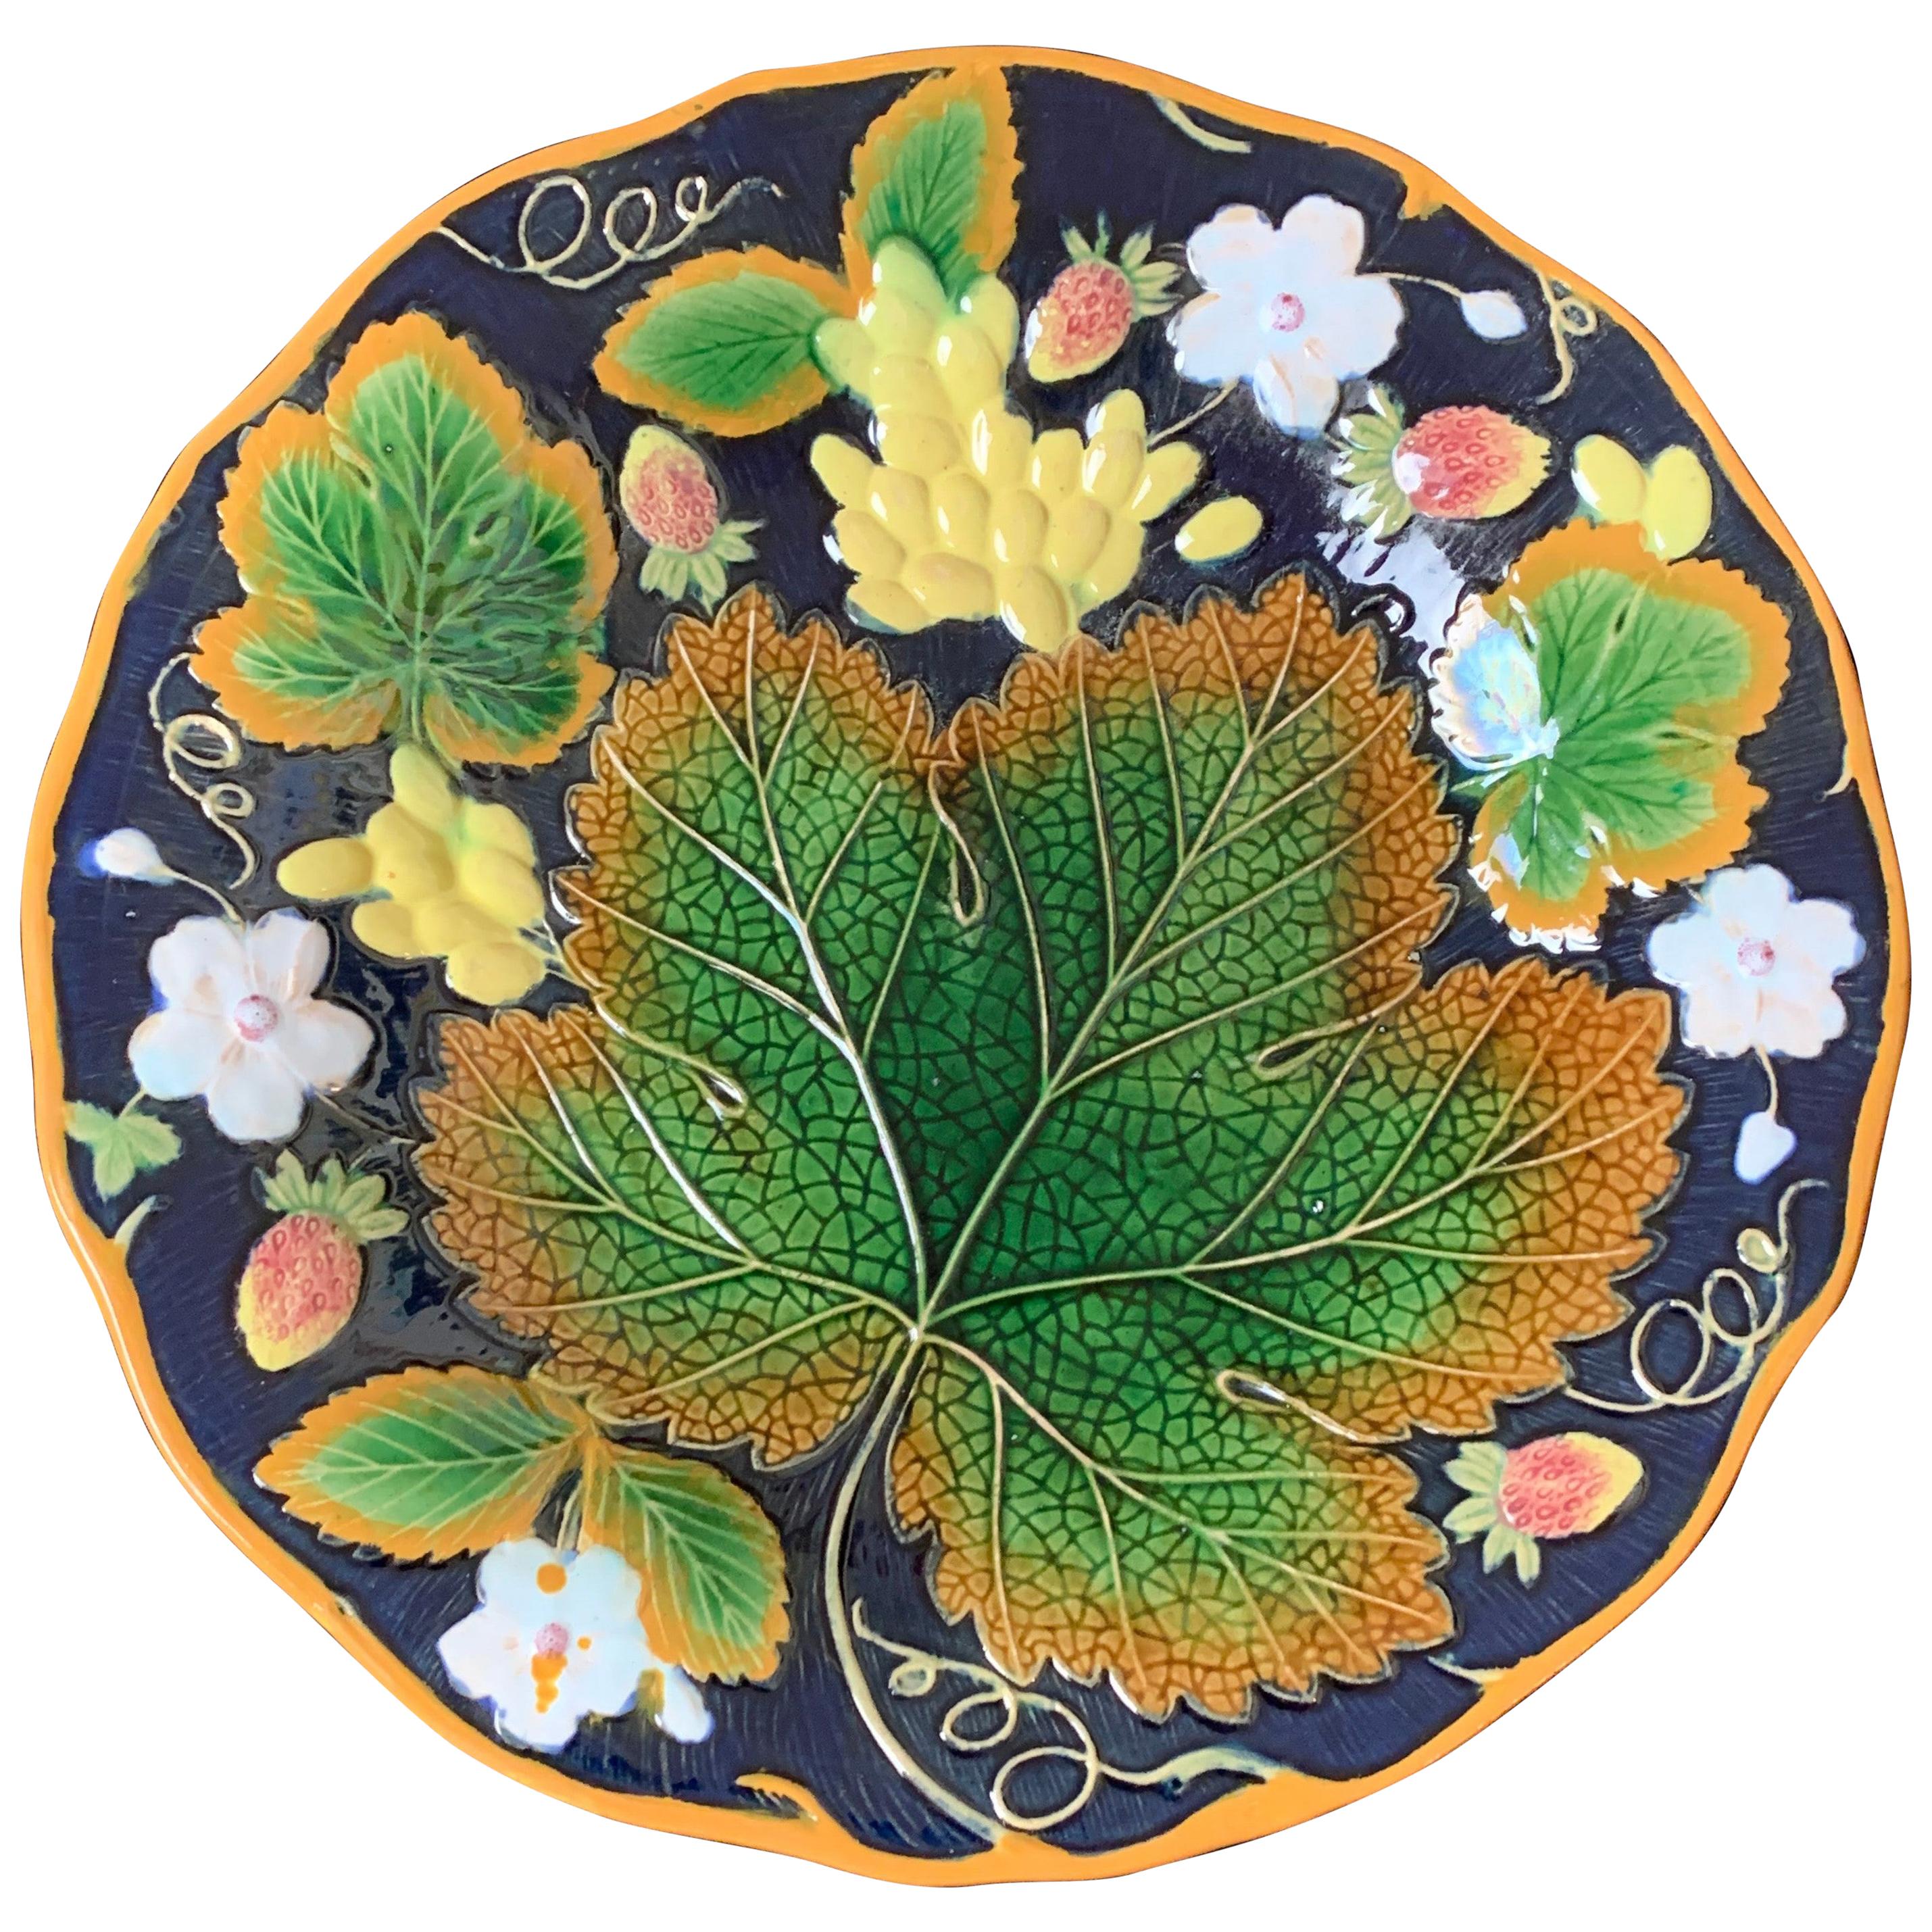 Wm. Brownfield Majolica Leaf and Strawberry Plate in Cobalt Blue, English, 1876